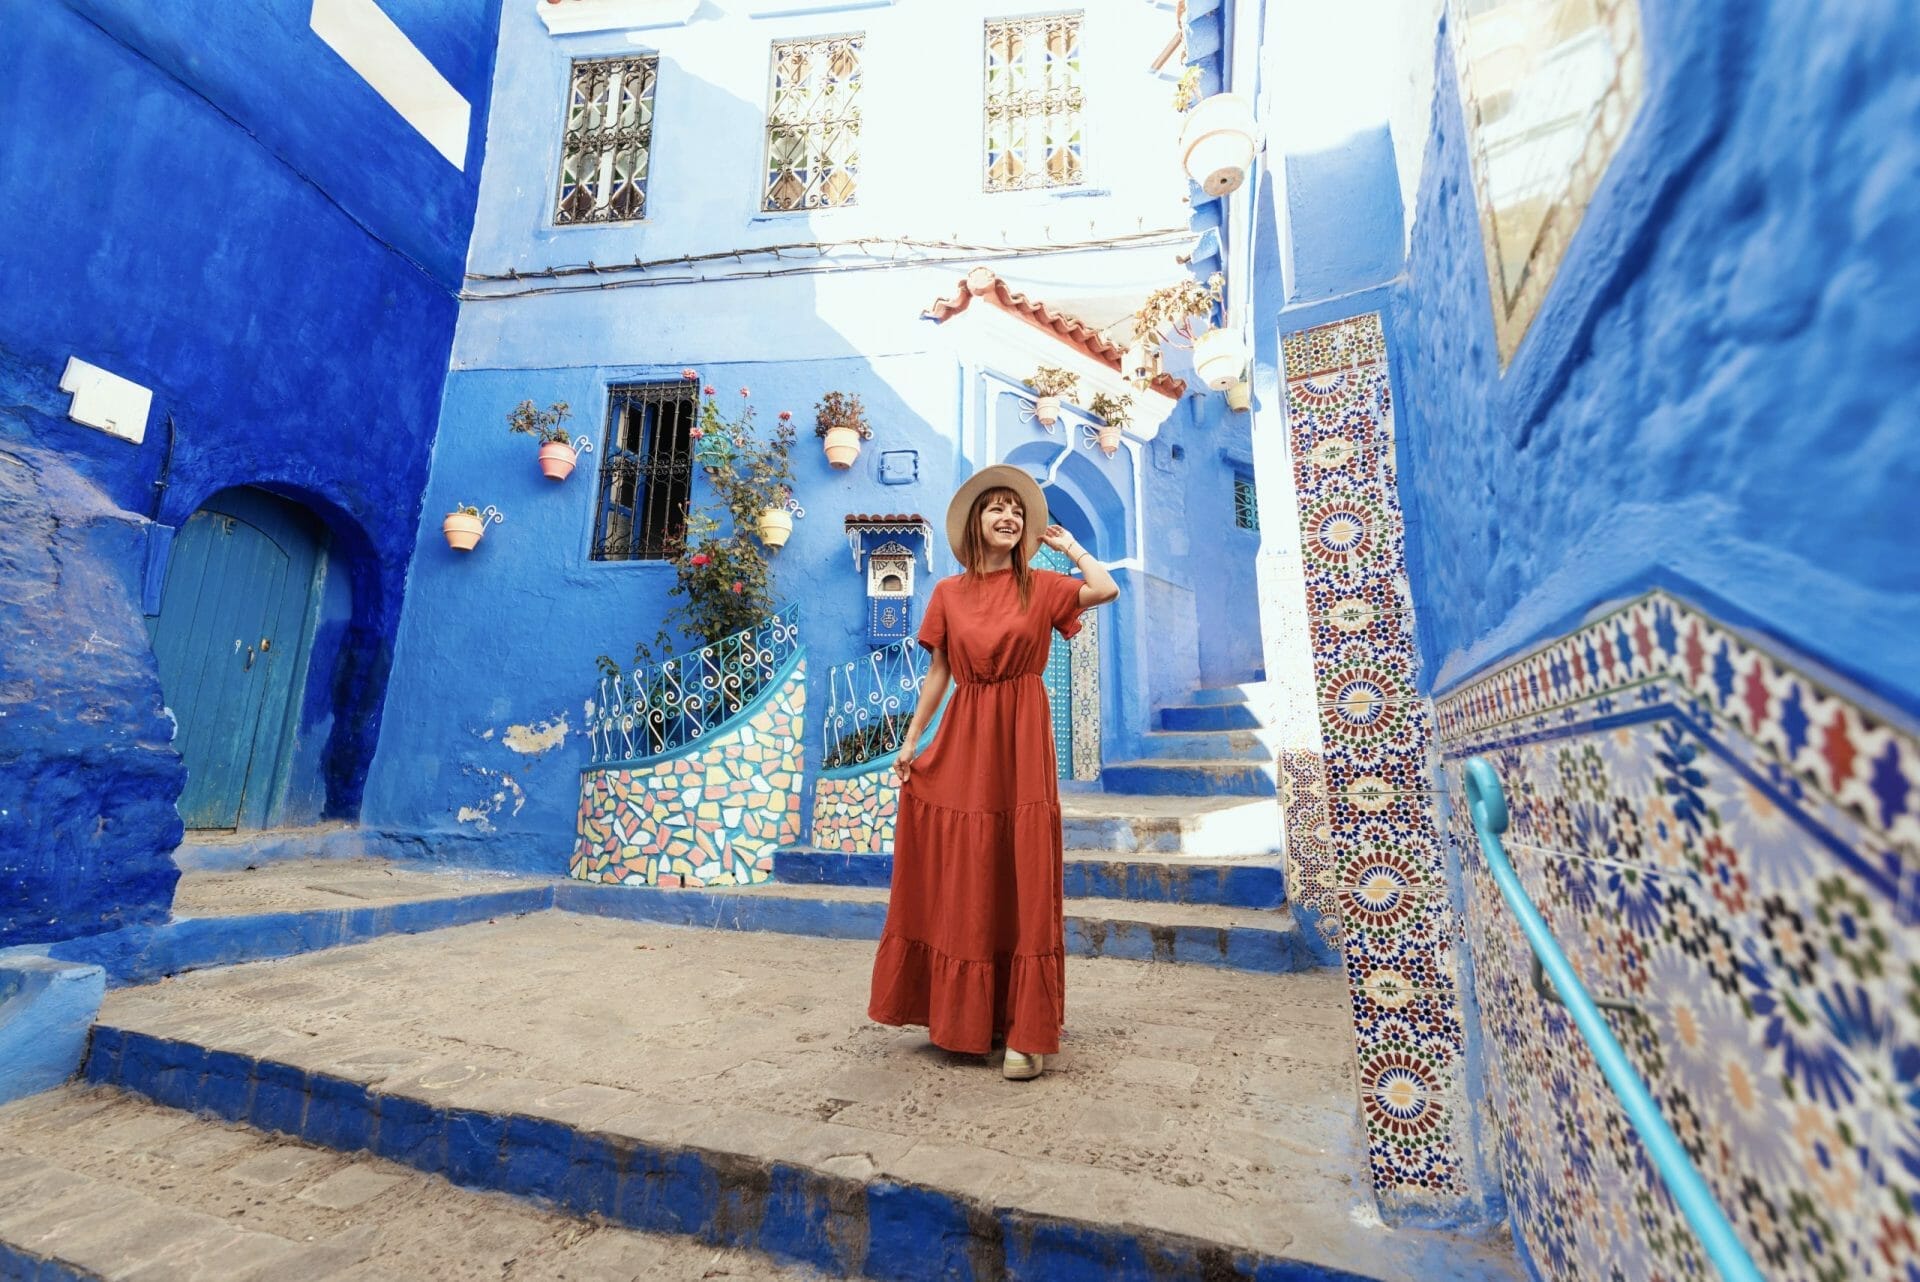 Young Woman With Red Dress Visiting The Blue City Chefchaouen, Marocco Happy Tourist Walking In Moroccan City Street Travel And Vacation Lifestyle Concept